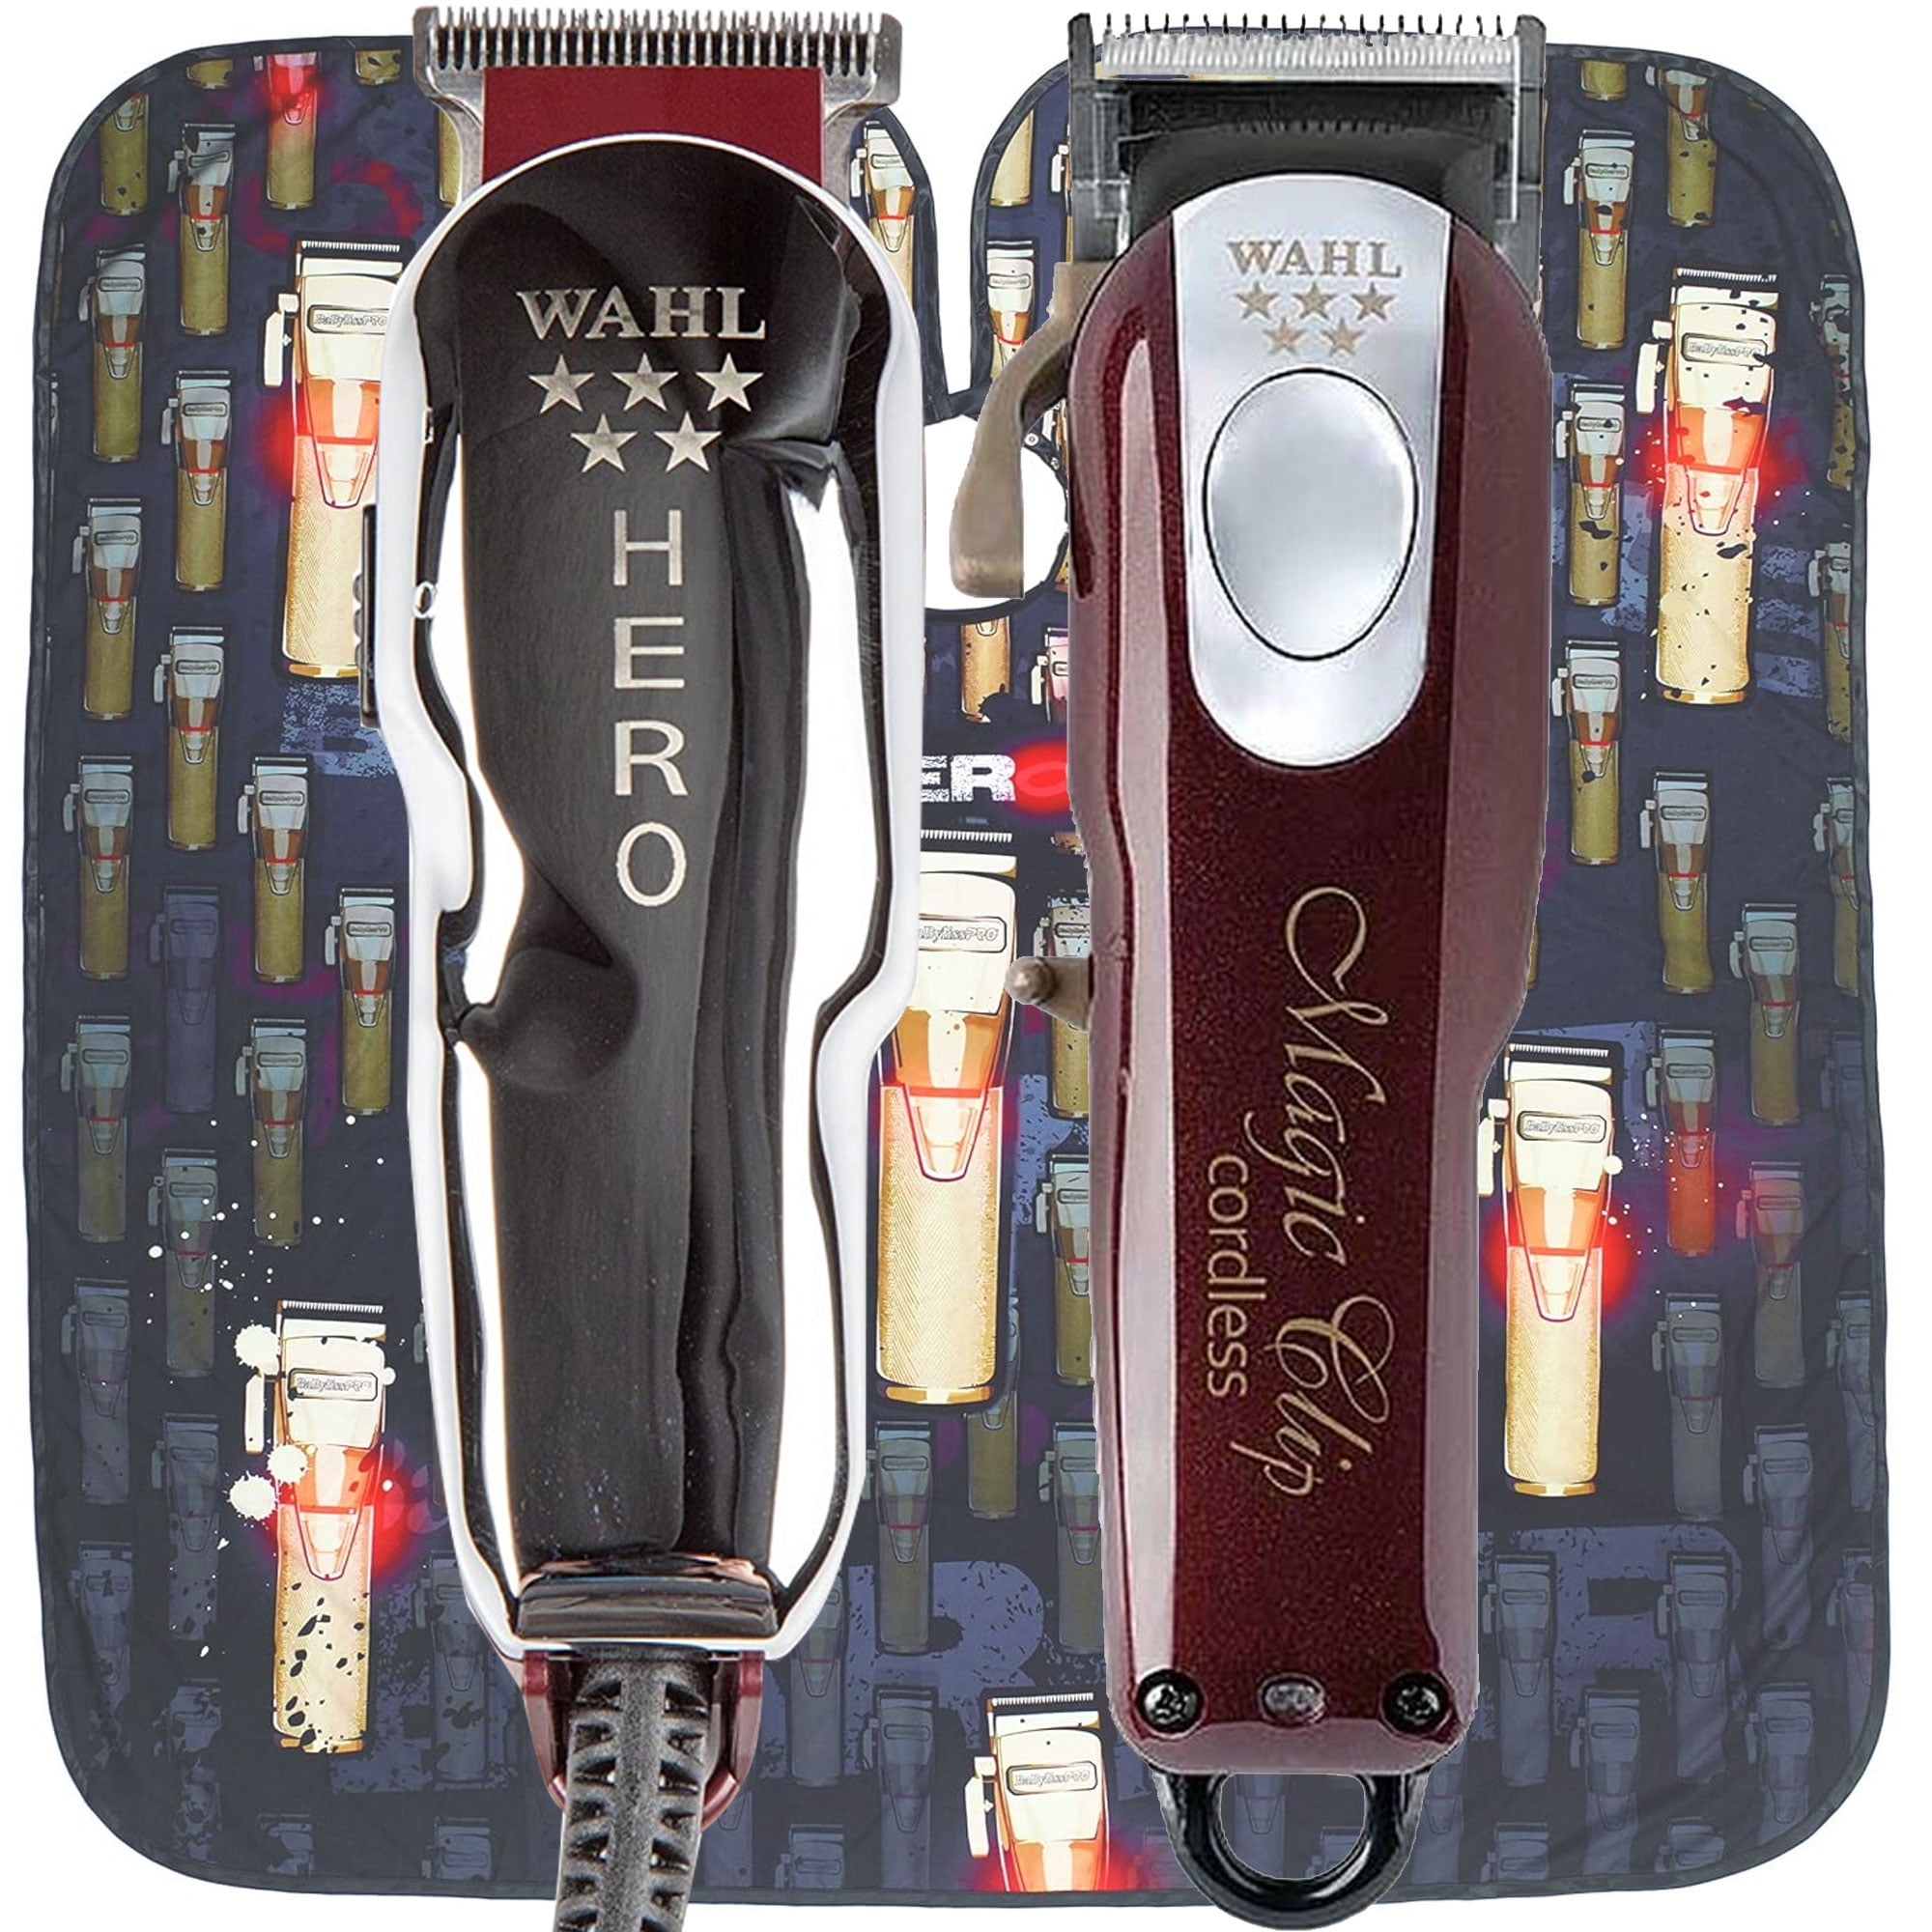 Wahl Professional 5-Star Cord/Cordless Magic Clip #8148 - Great for Barbers  and Stylists - Precision Cordless Fade Clipper Loaded with Features - with